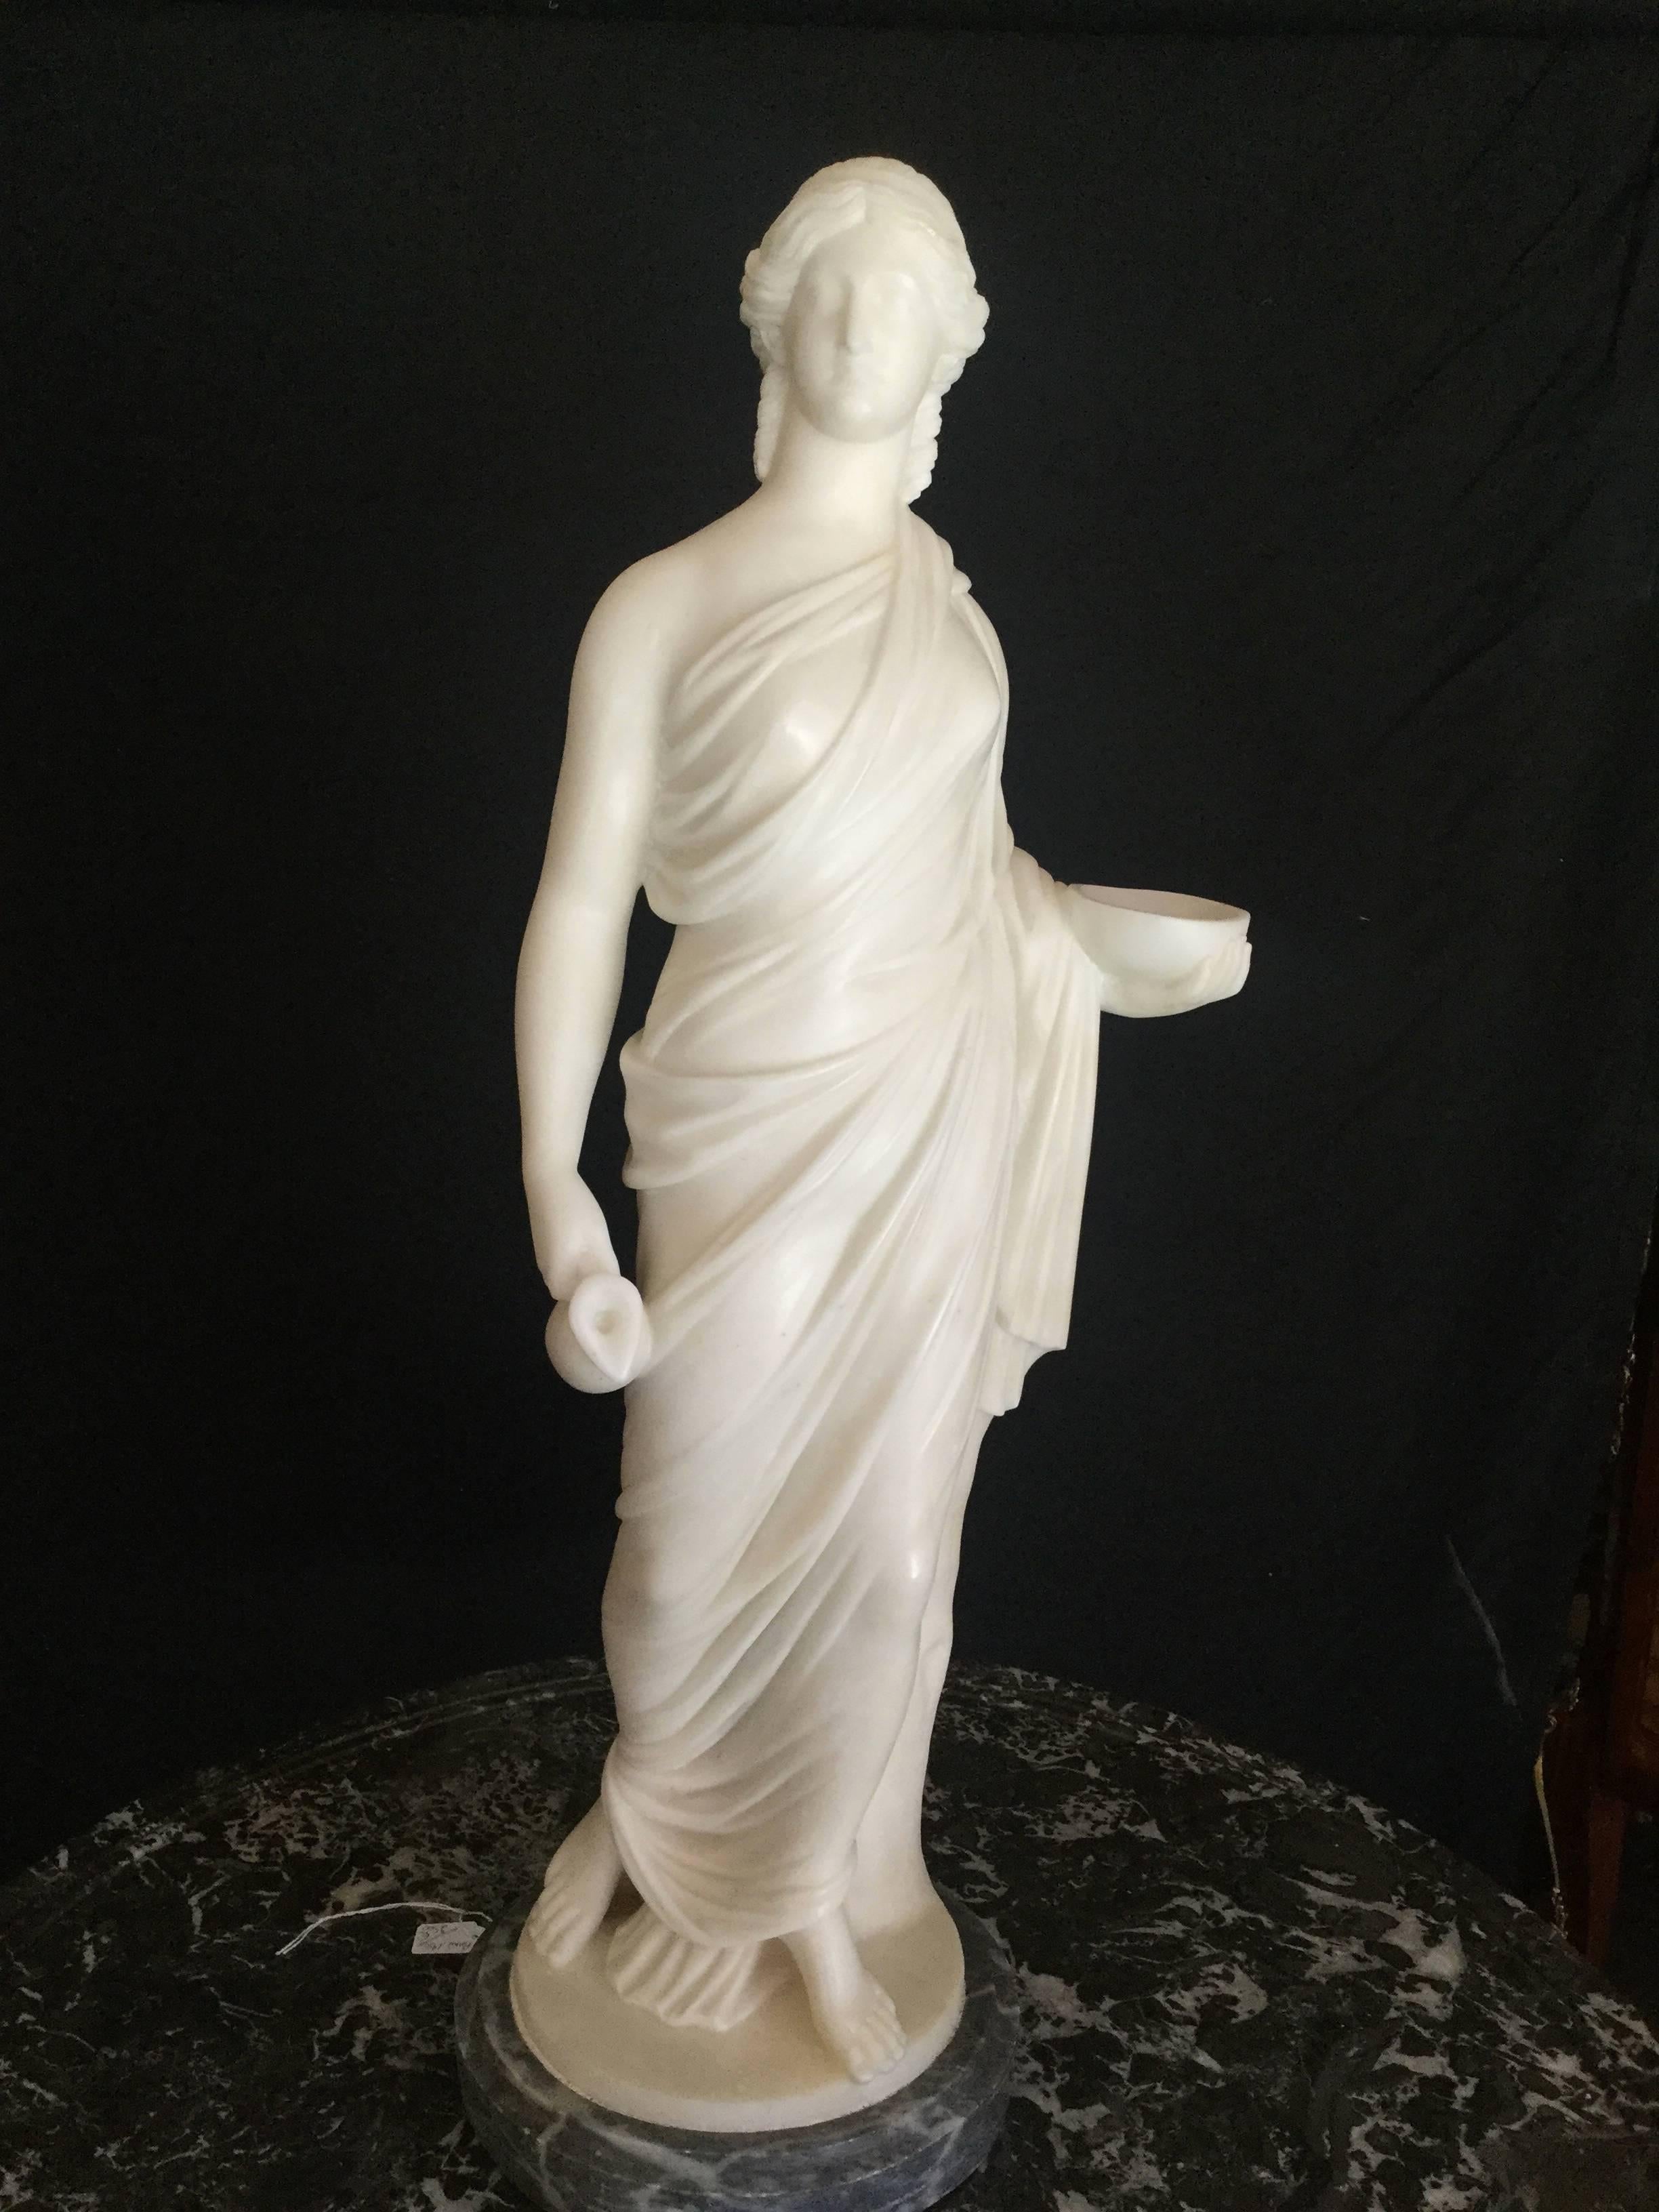 Fine quality hand-carved Carrara marble Hebe sculpture, the Greek goddess of Youth pouring wine into a cup. Italian work late 19th century, circa 1880.

Dimensions: 30.31 in H – 9.84 in D.

She usually in its allocation all that concerned